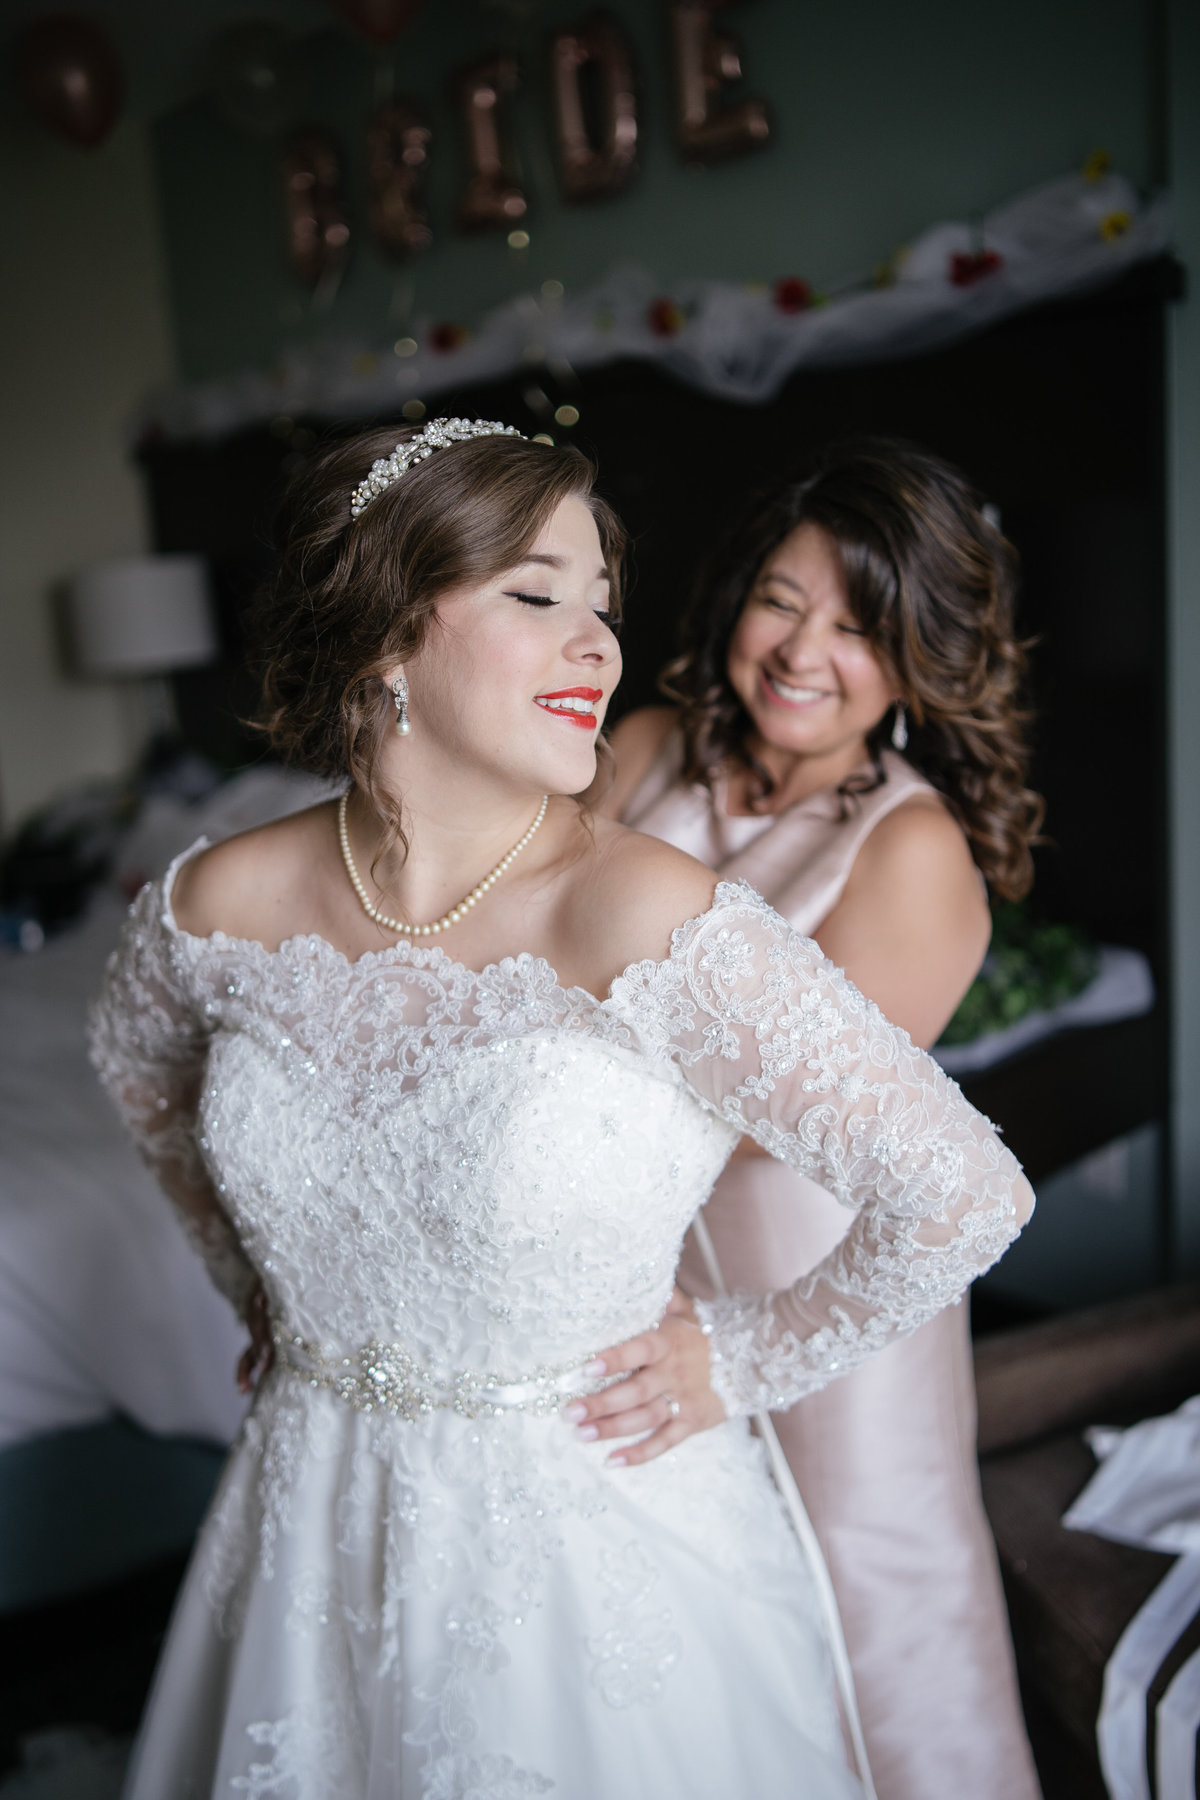 Bride smiles at her mom while bustling her gown as she gets ready for wedding ceremony at The Spire downtown San Antonio